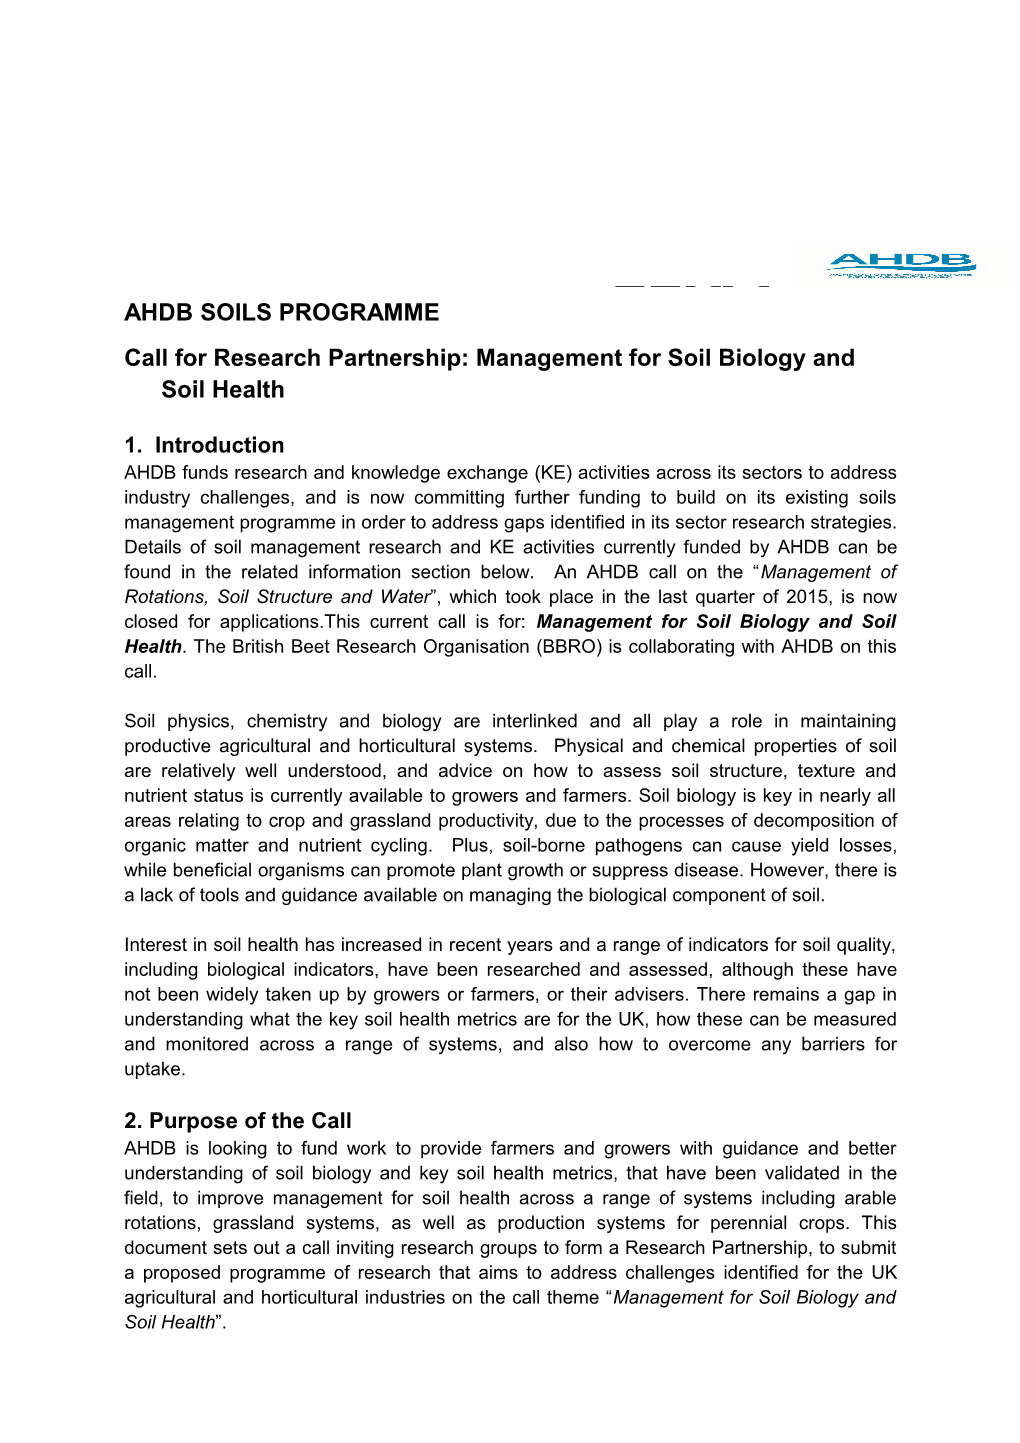 Call for Research Partnership: Management for Soil Biology and Soil Health